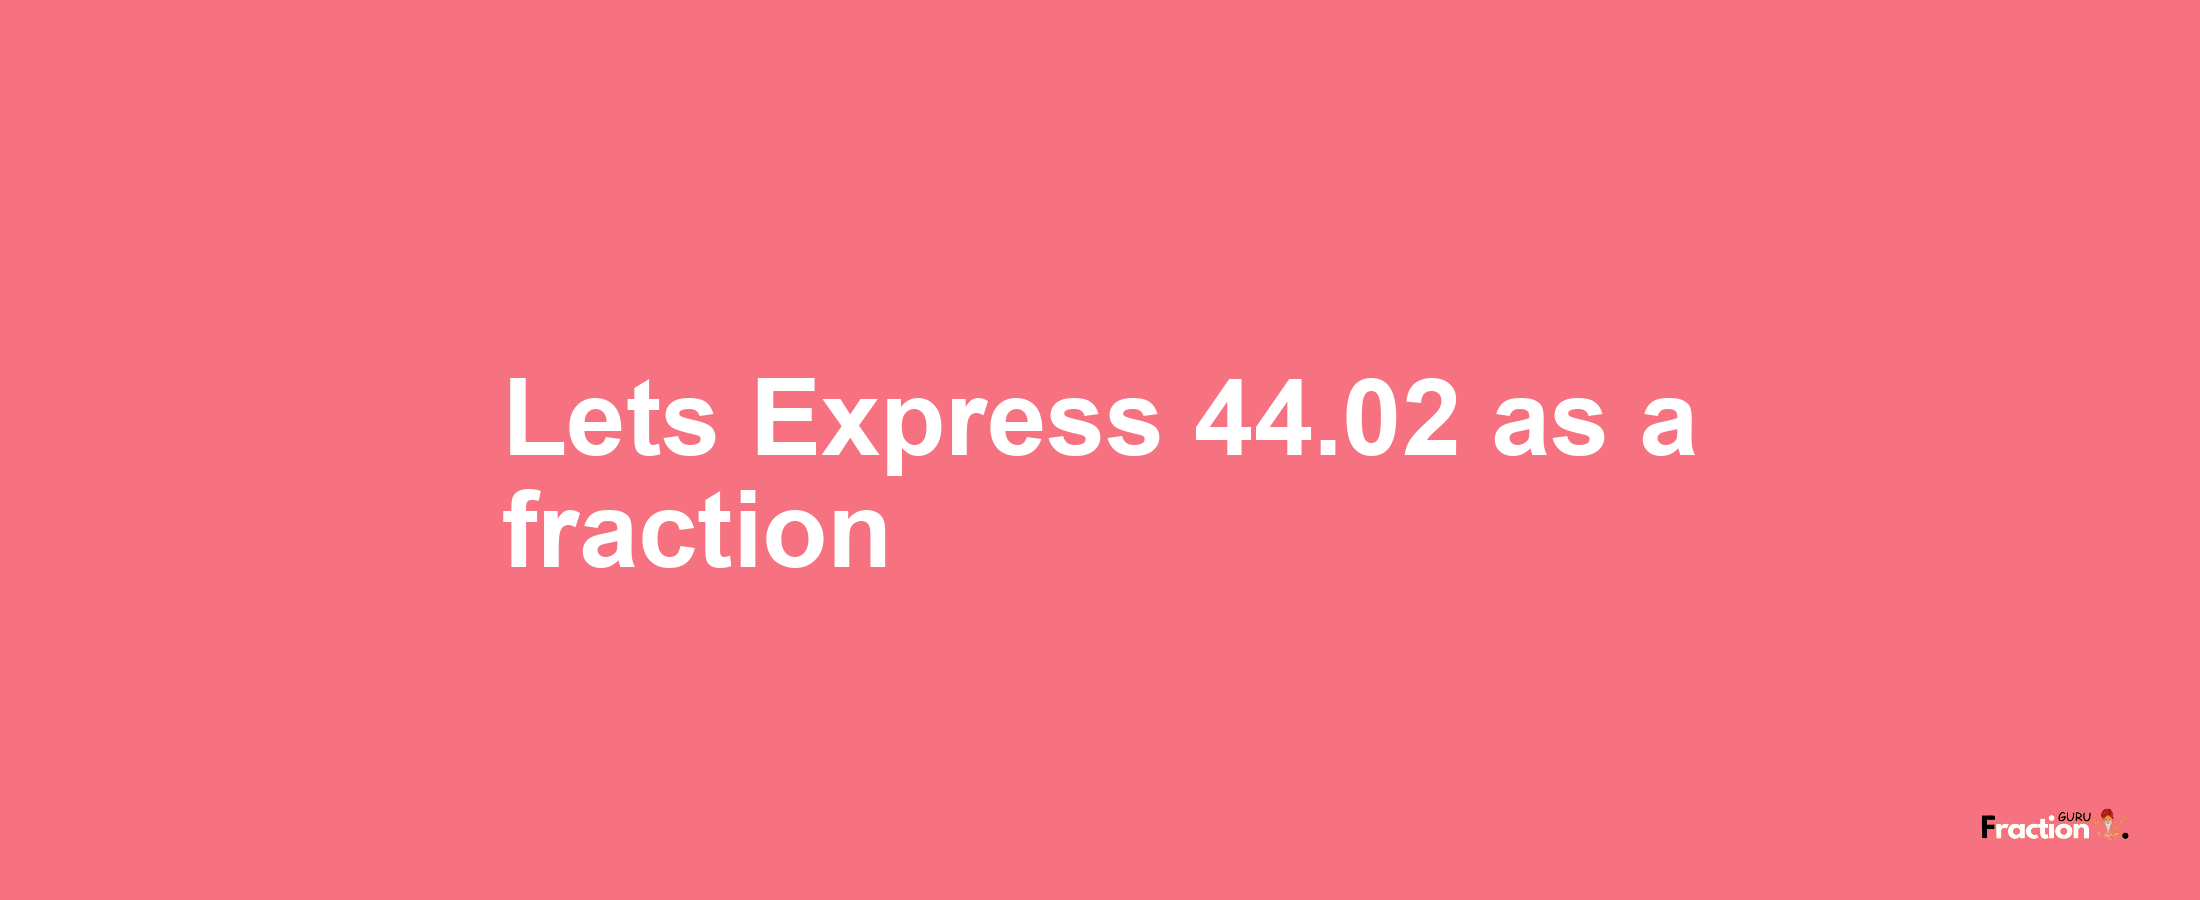 Lets Express 44.02 as afraction